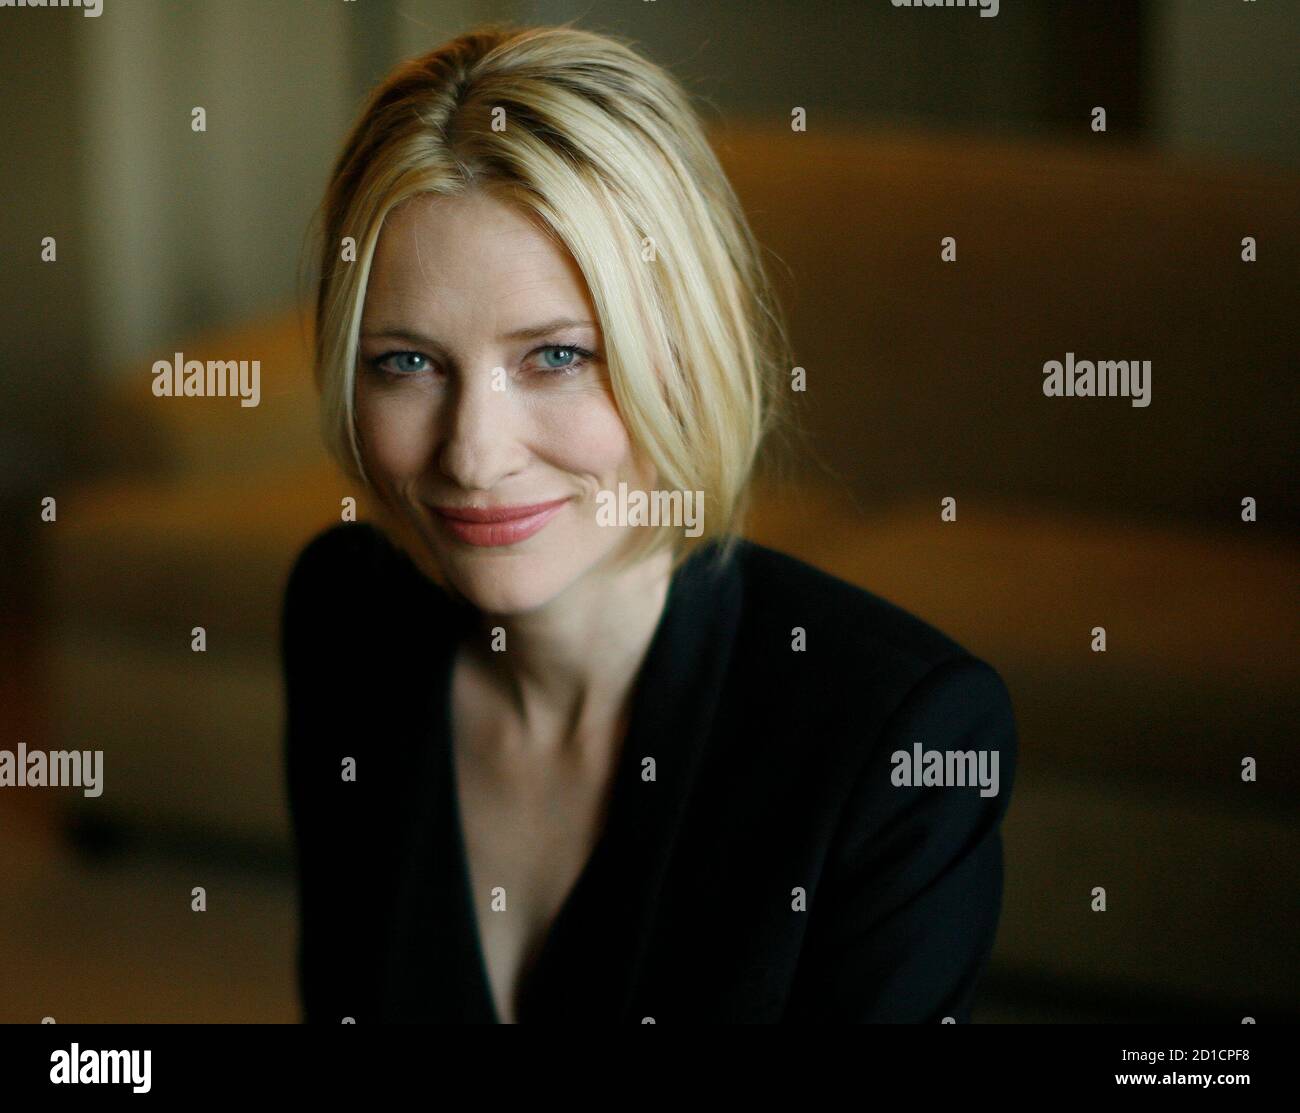 Australian actress Cate Blanchett, who portrays Daisy in the movie "The  Curious Case of Benjamin Button", poses for a portrait in Beverly Hills,  California December 7, 2008. REUTERS/Mario Anzuoni (UNITED STATES Stock